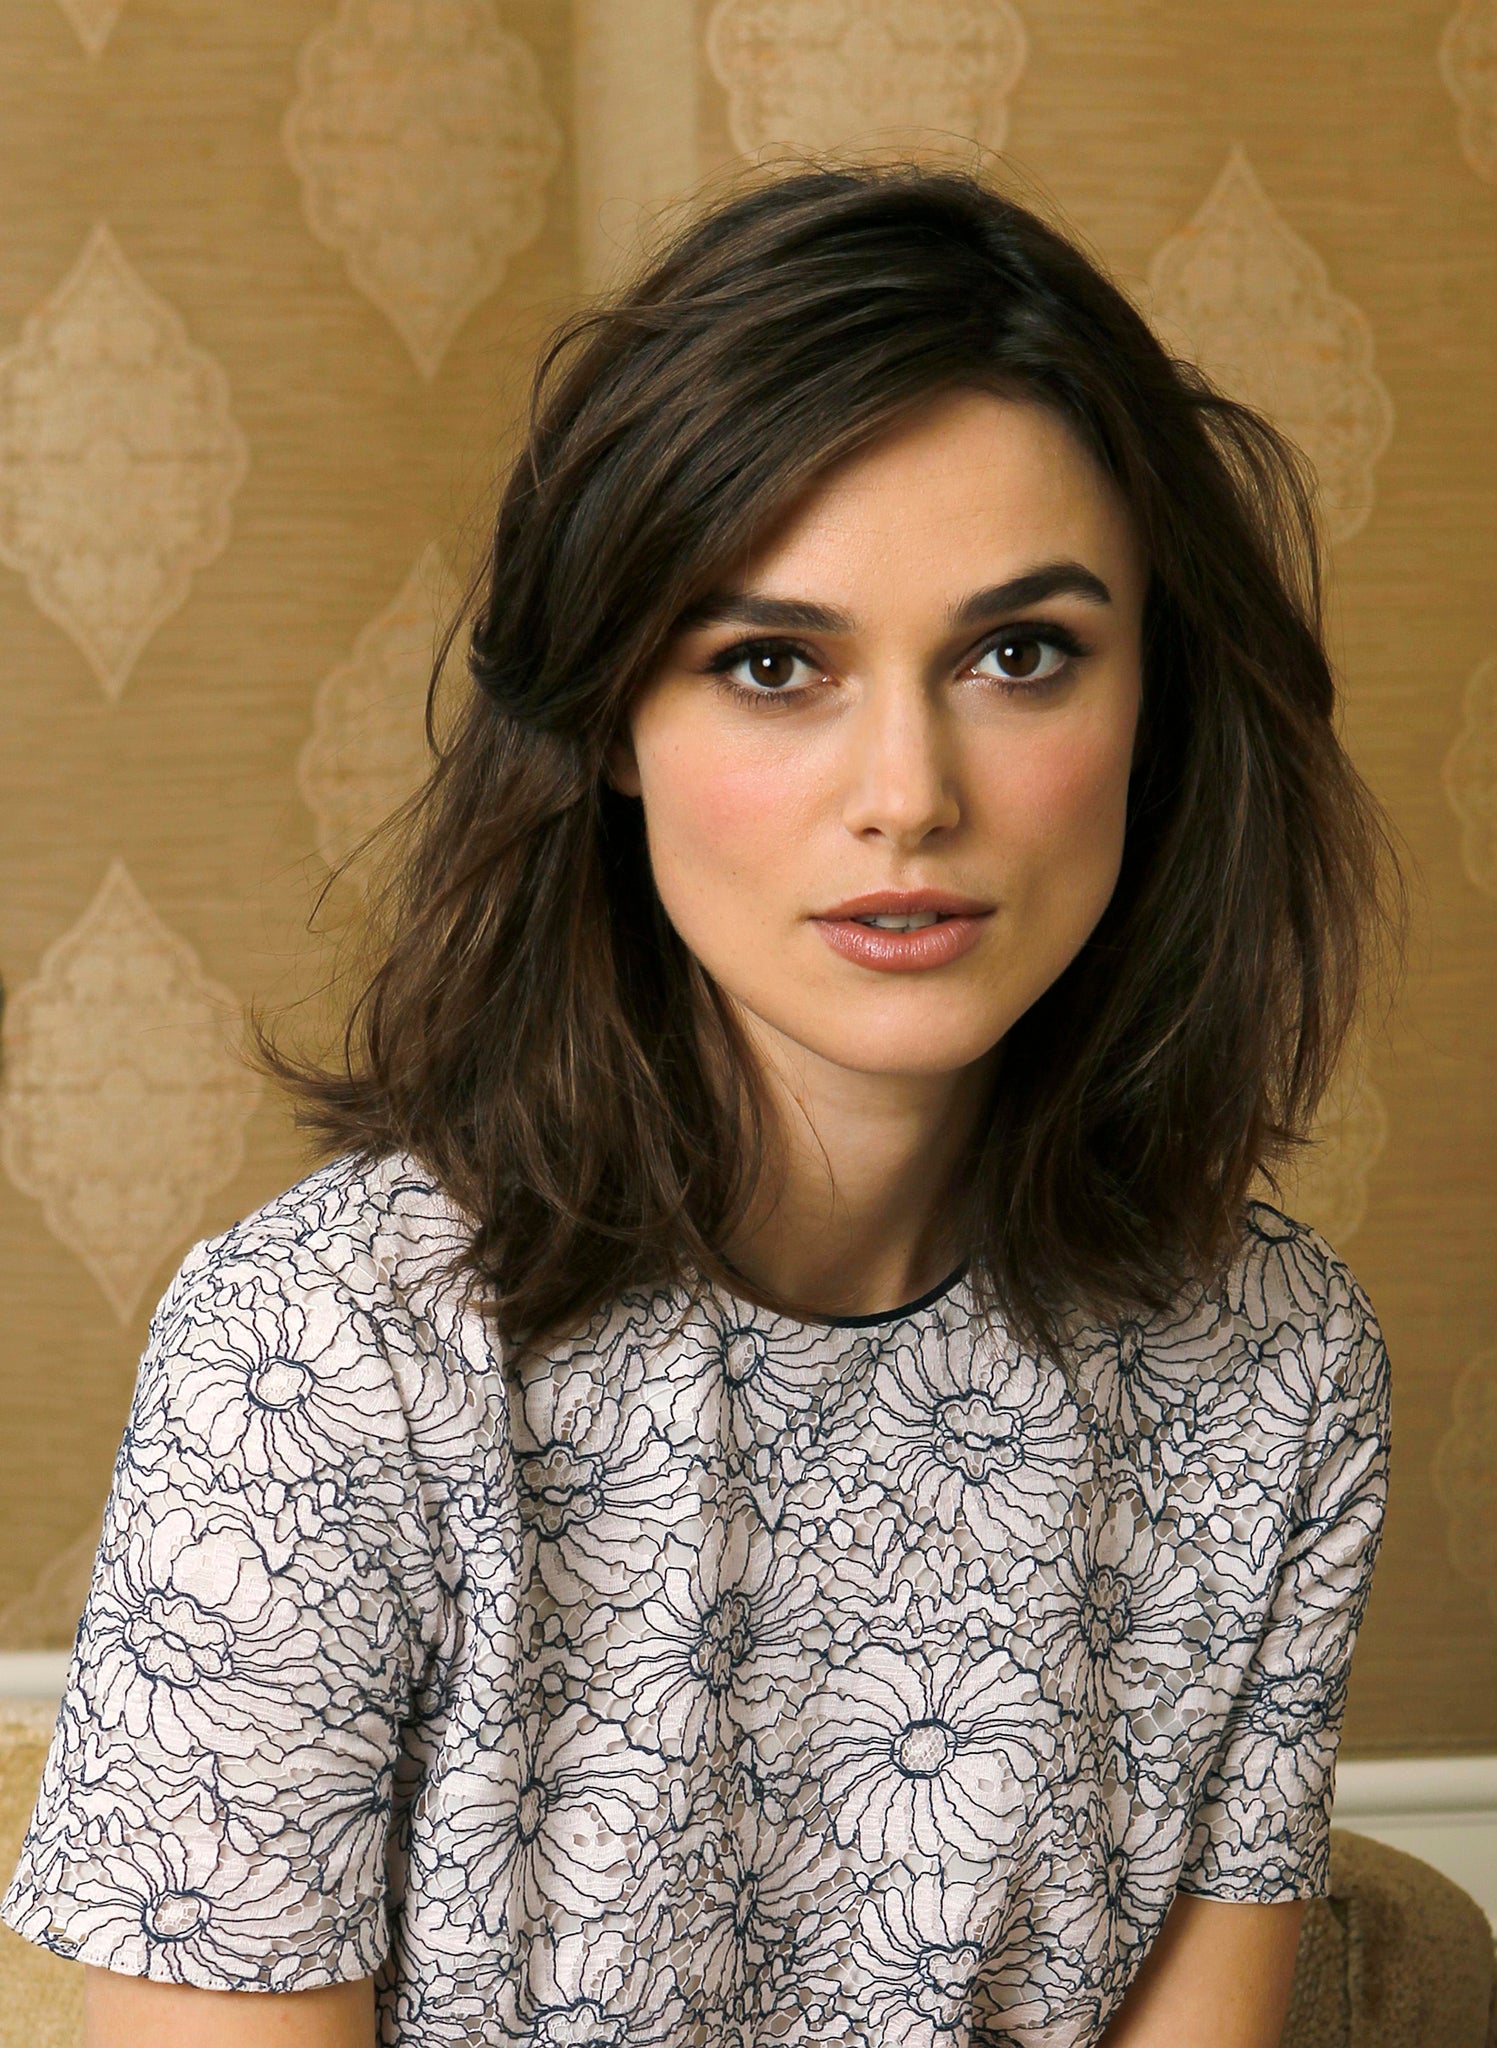 Fifty Shades of No Way Keira Knightley rules herself out of playing Anastasia Steele The Independent The Independent image